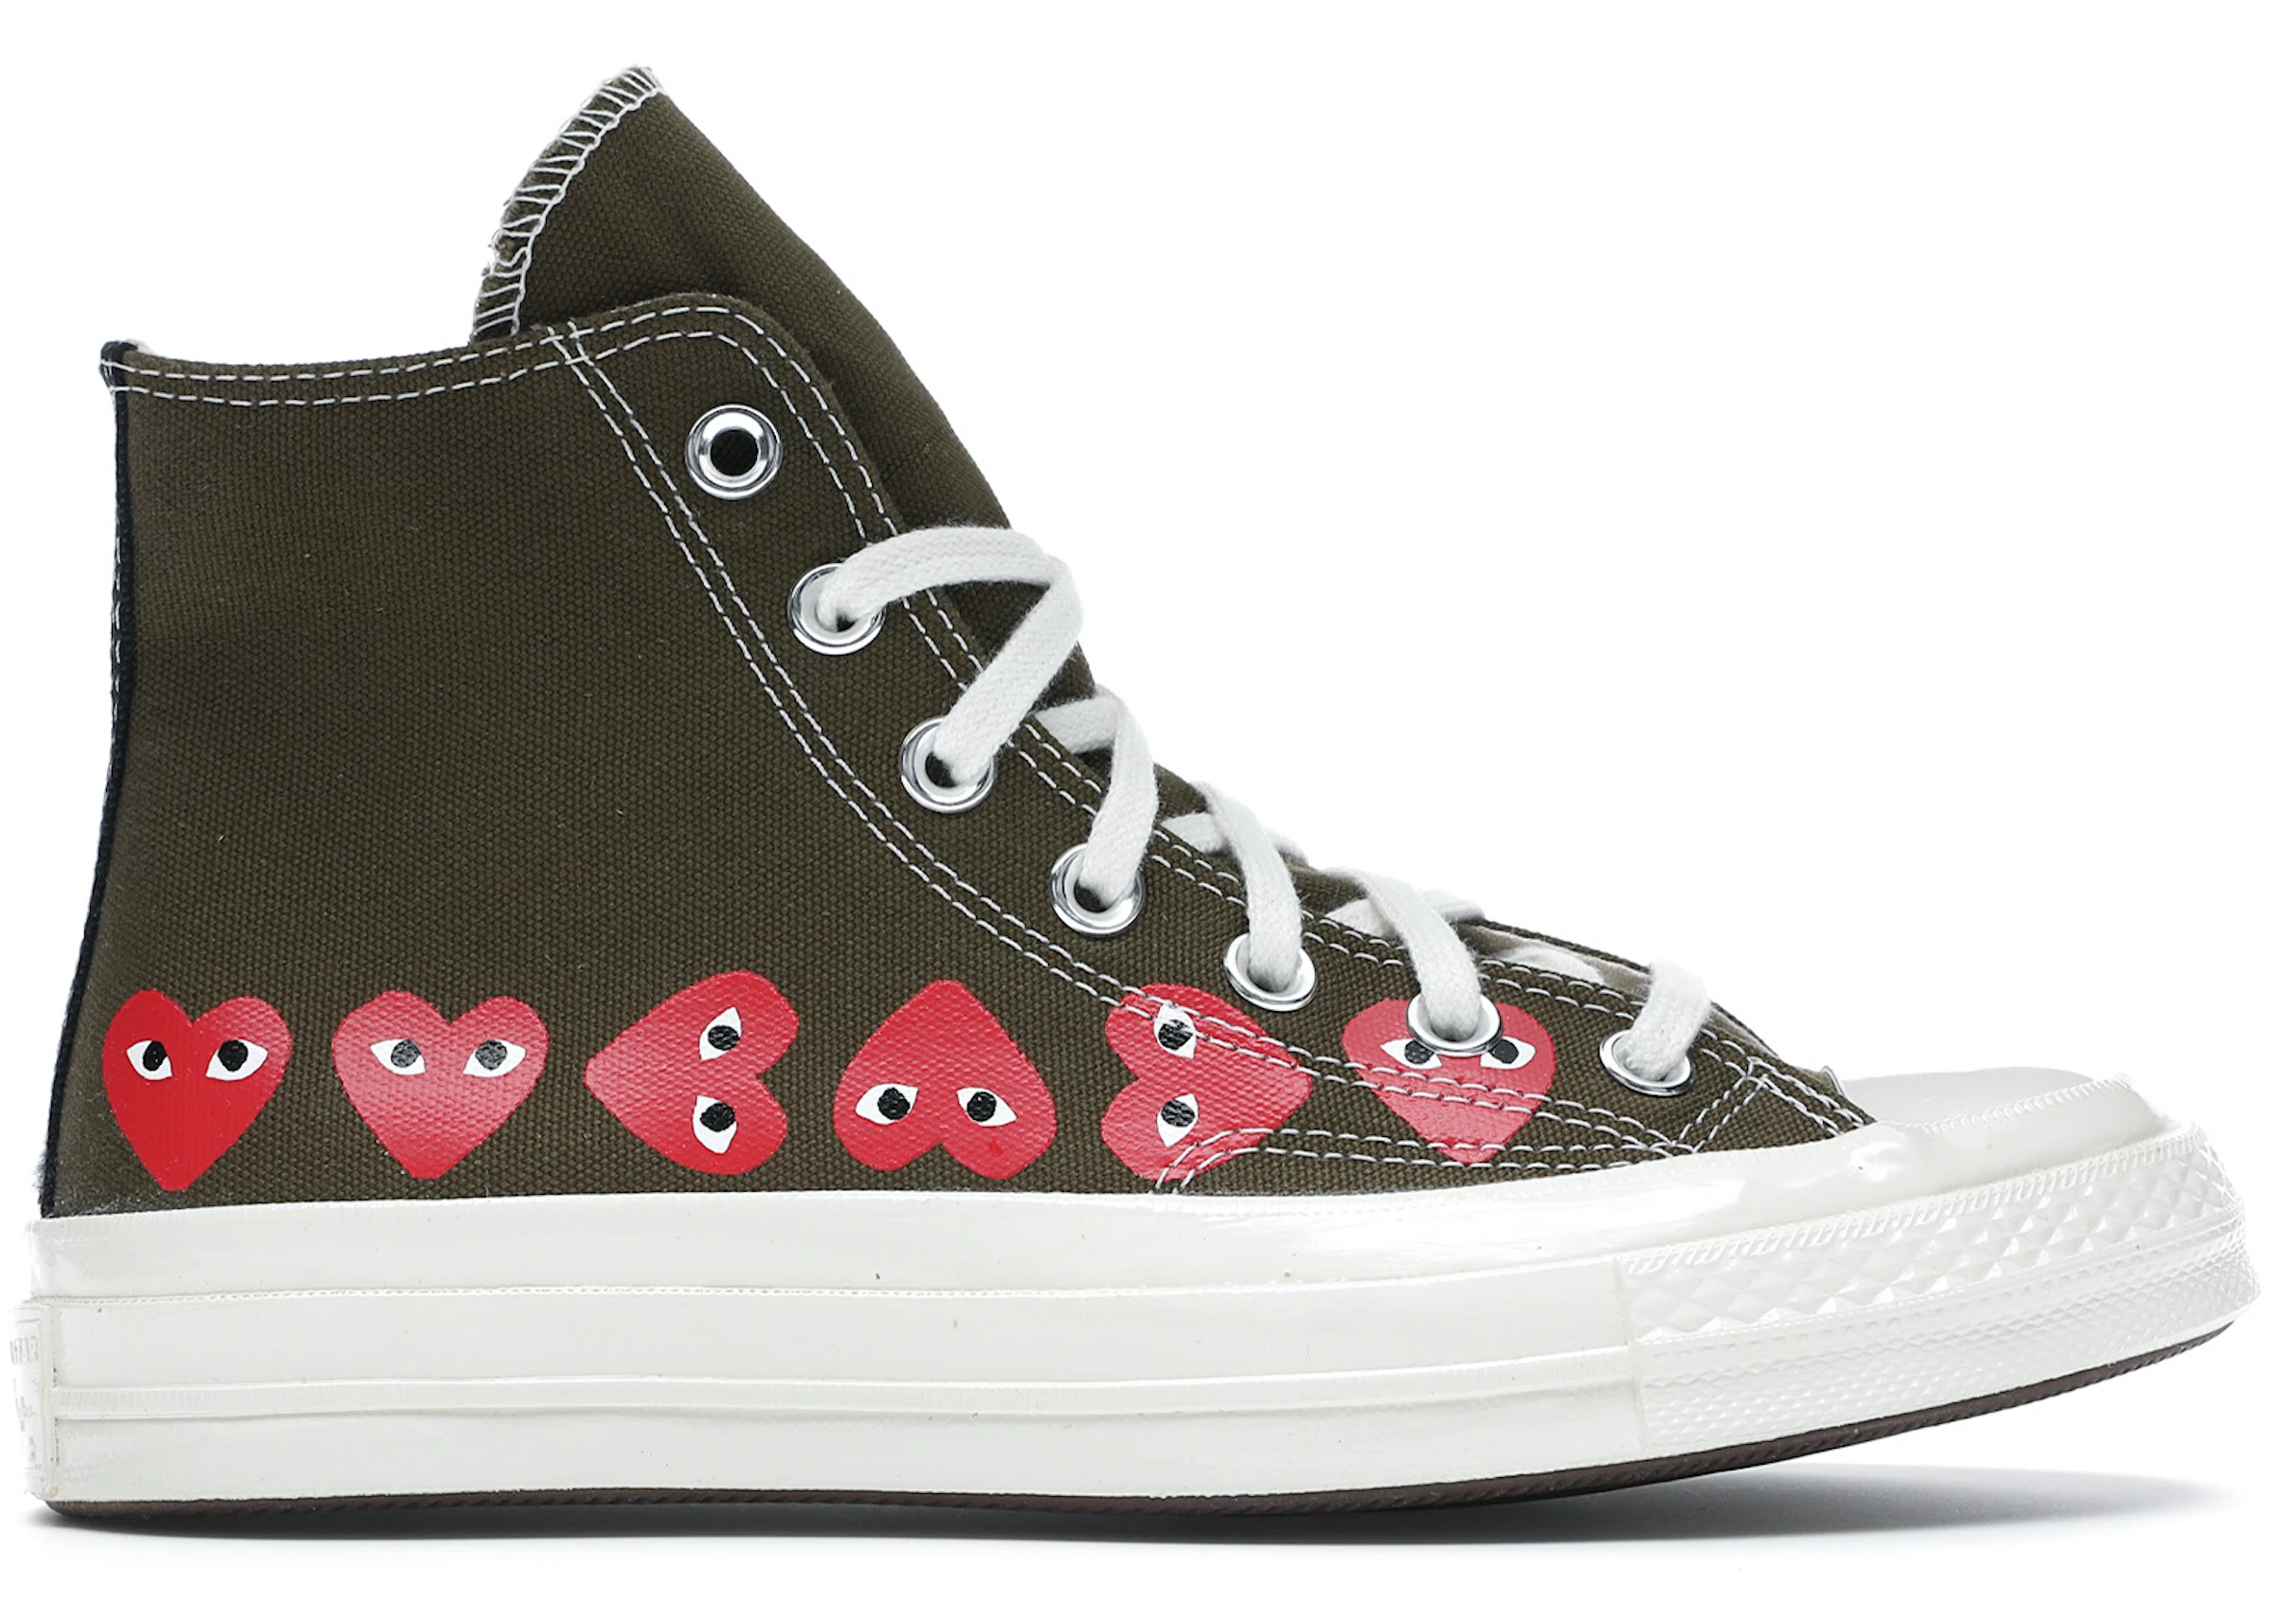 Converse Chuck Taylor All-Star 70 Hi Comme des Garcons Play Multi-Heart  Green - 162973C - US